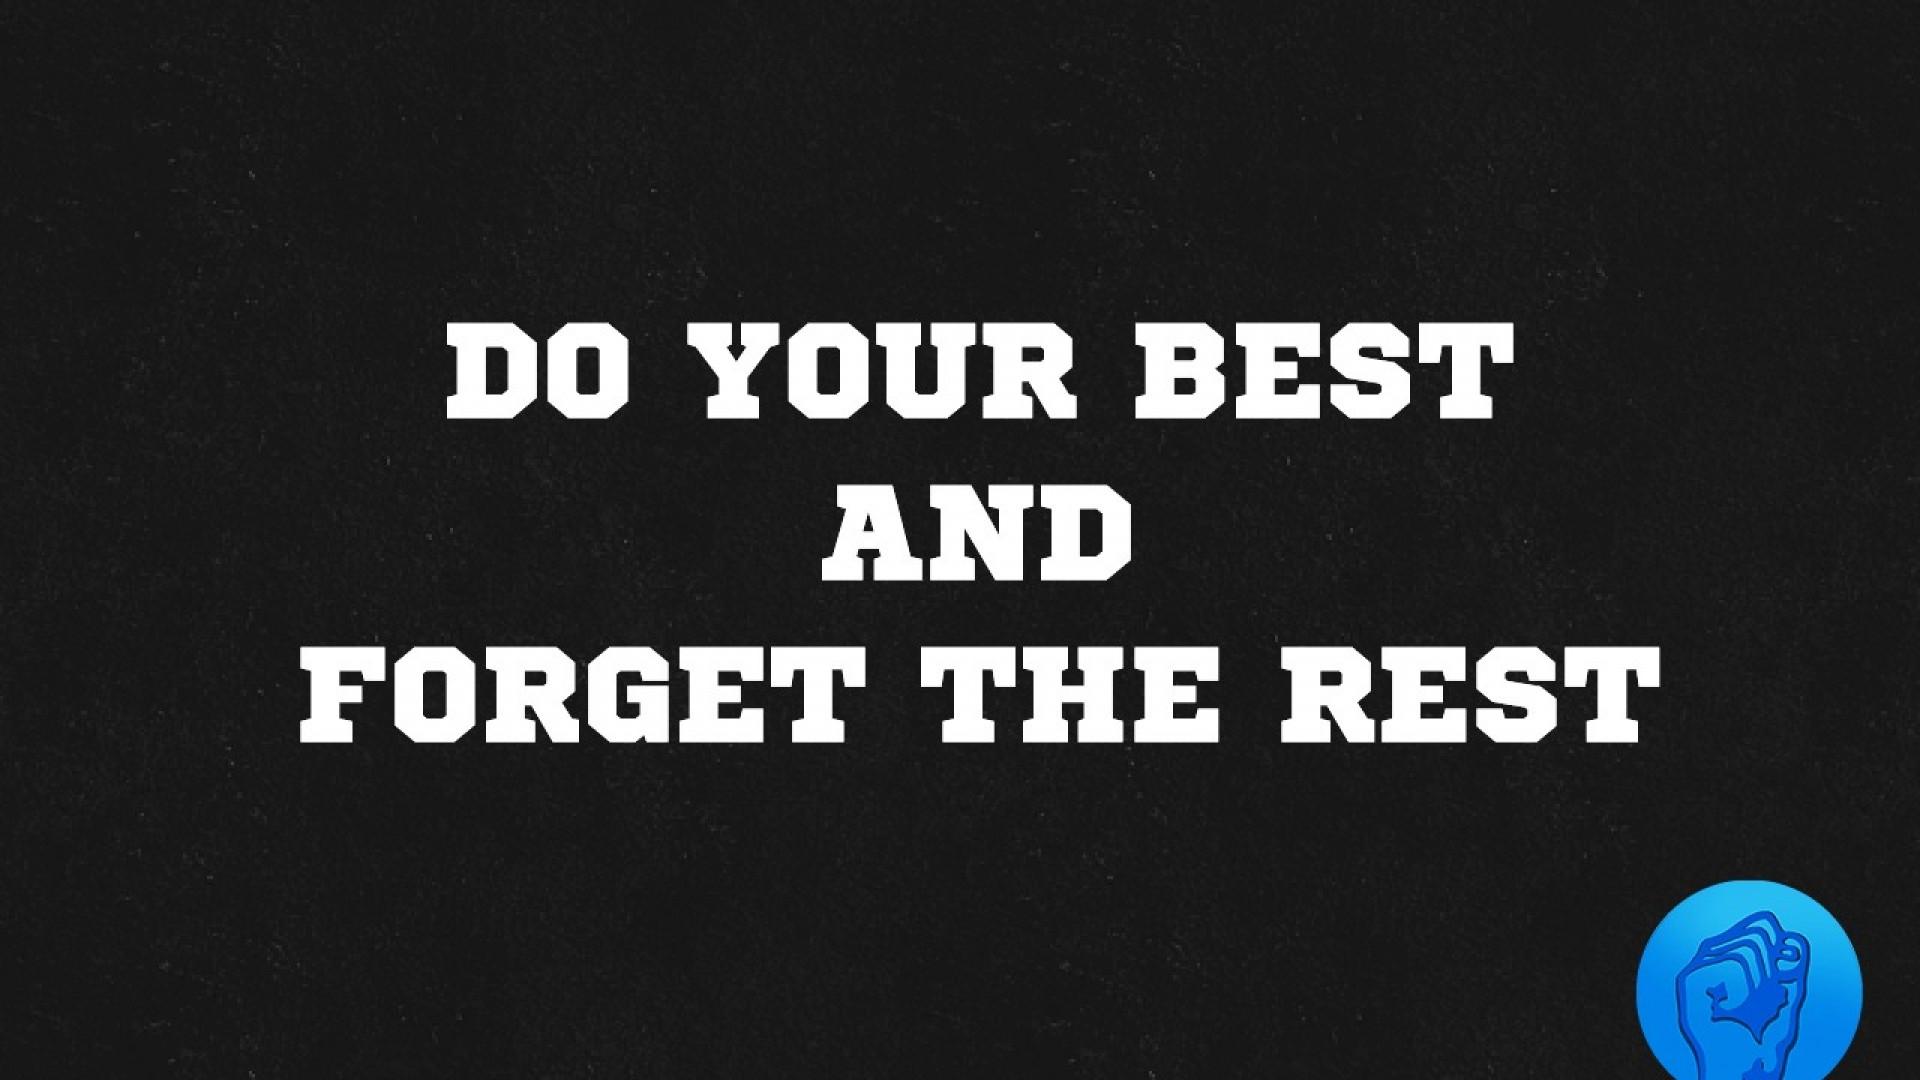 Do Your Best And Forget The Rest, HD Typography, 4k